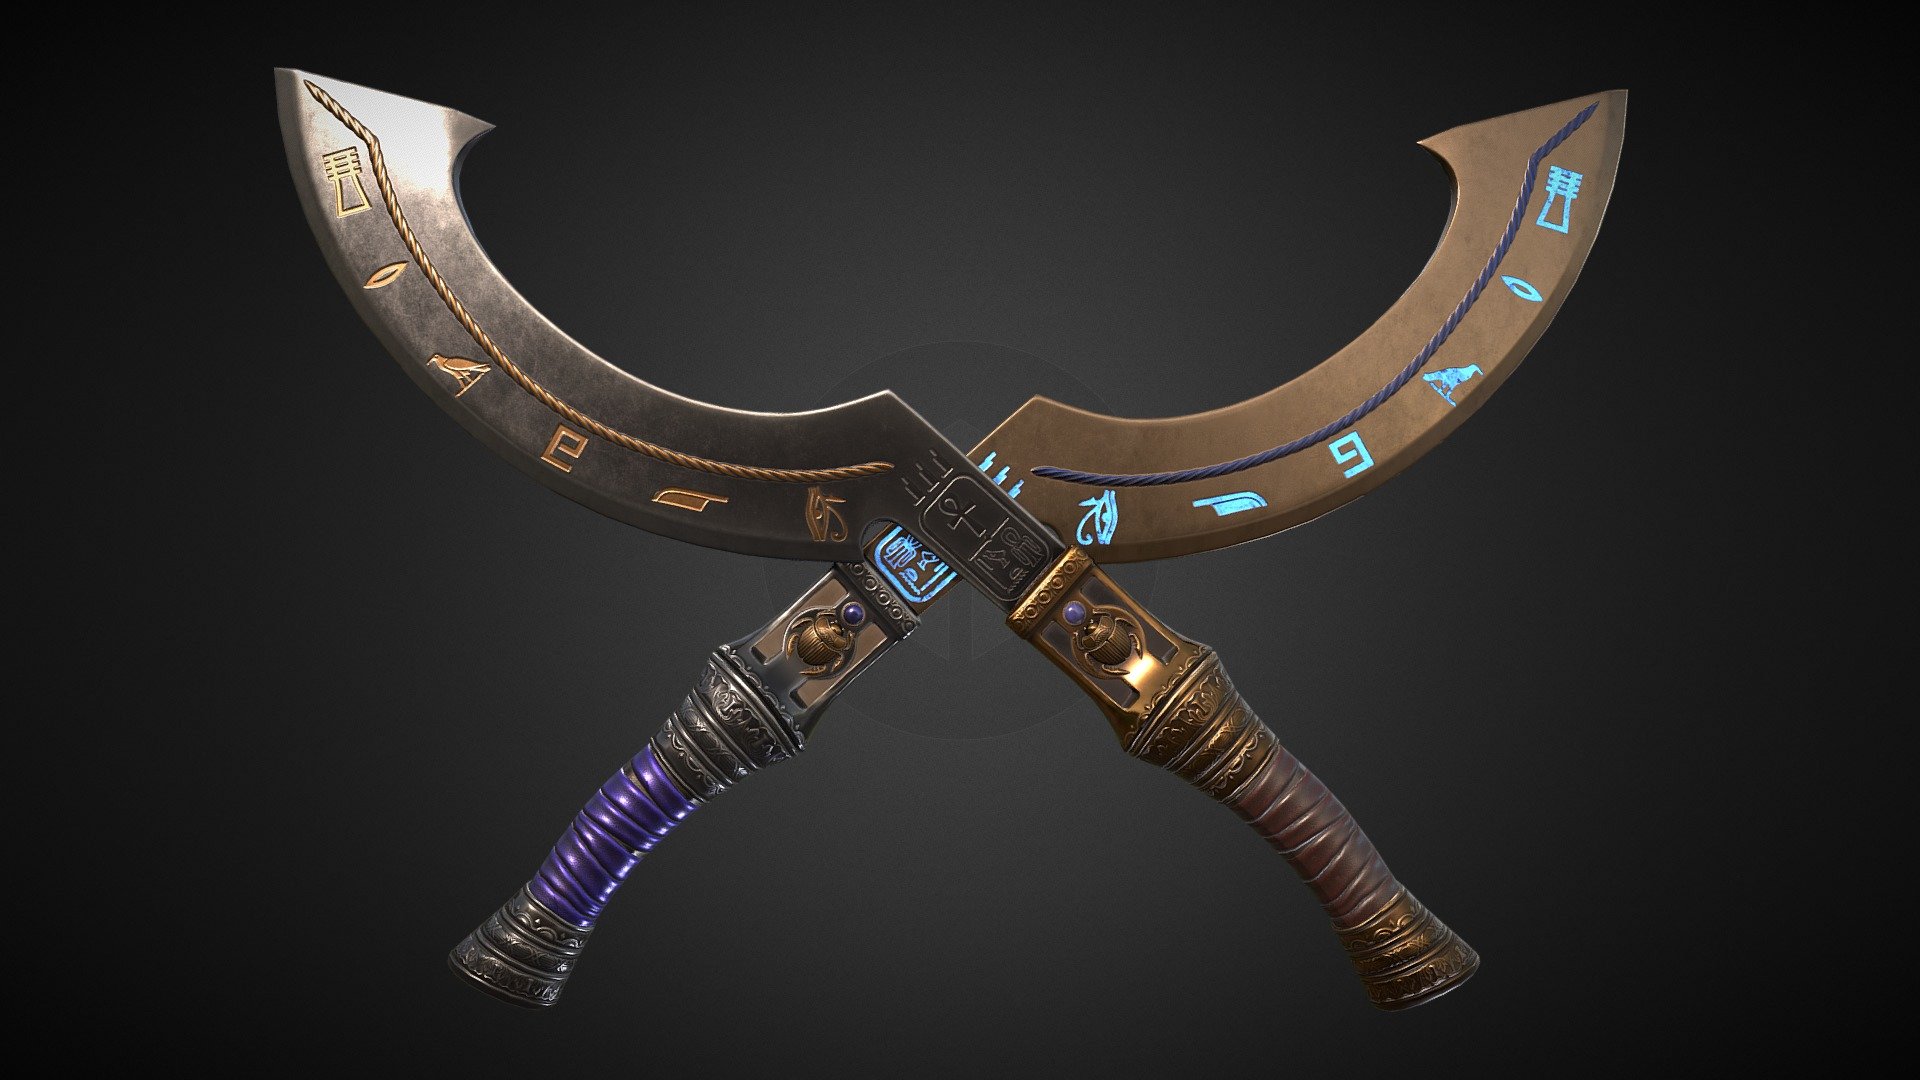 Commissioned by Terrornaut for the Deadlands Mod for Conan Exiles, Unreal texture included.

A recent commission, Unreal and Normal Texture are both included in 2K , please download the additional file.

Culanni has always been used as a dual sword.

The black one heavy and tip-heavy, unwieldy but its blow devastating.

The golden one light and balanced, swift in its cut and precise in its movement.

Often the use of Culanni breaks the user's defense with its black pair, and swiftly ends their life with the gold.

The blades quickly dull and break under misuse, which says a lot given its current well-preserved state 3d model